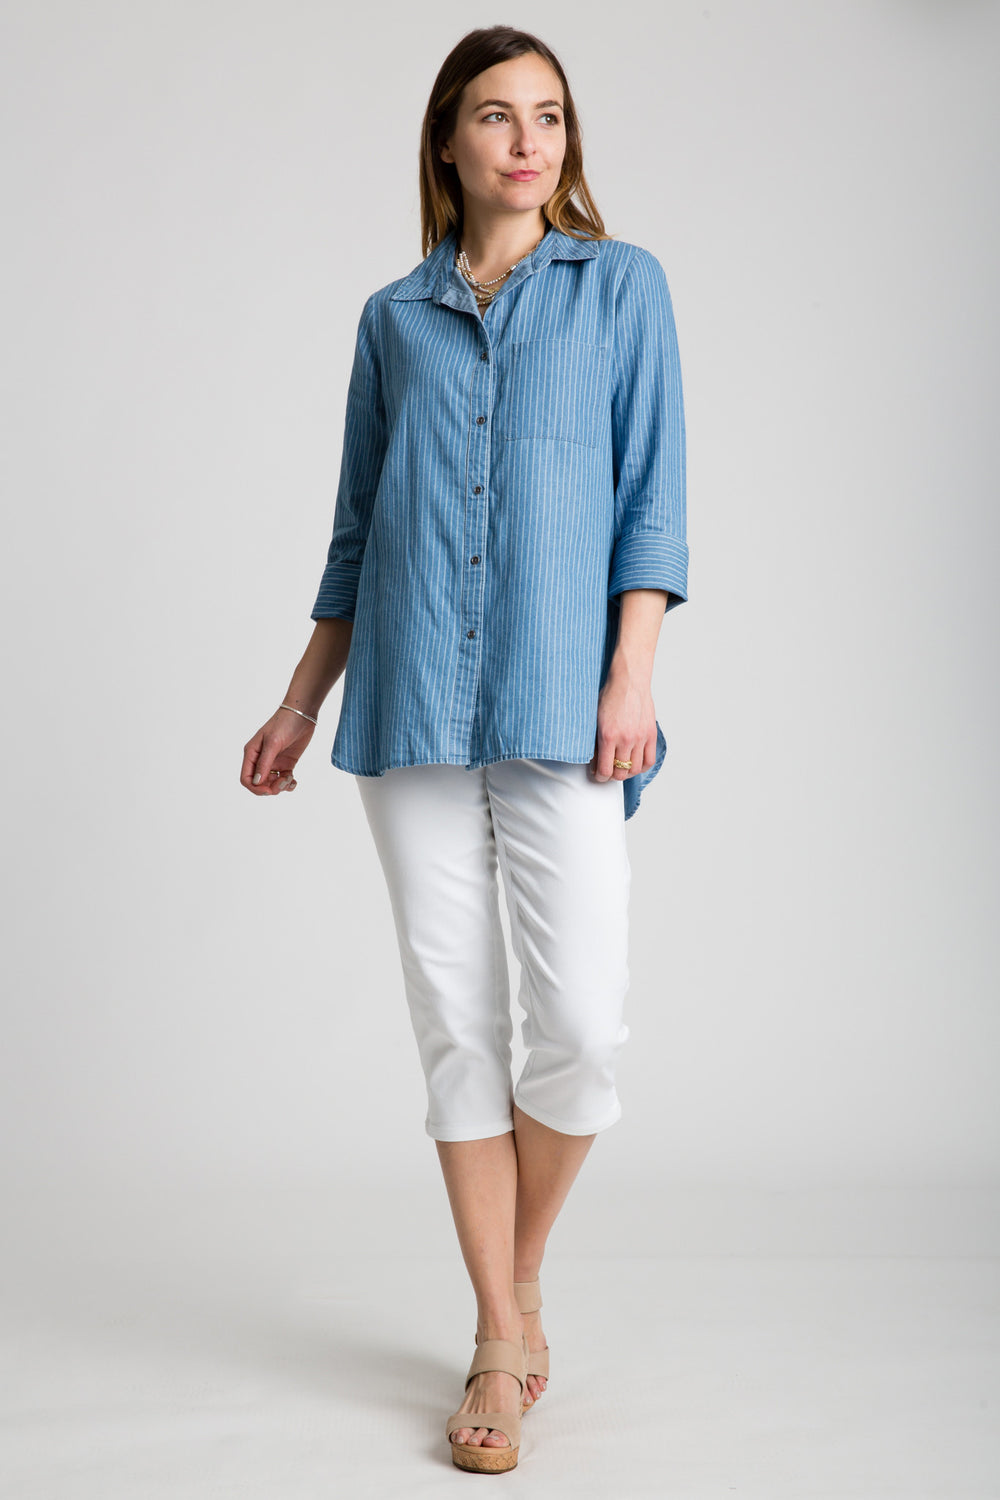 Denim Cuffed 3/4 Sleeve Button Front Top - INTROclothing